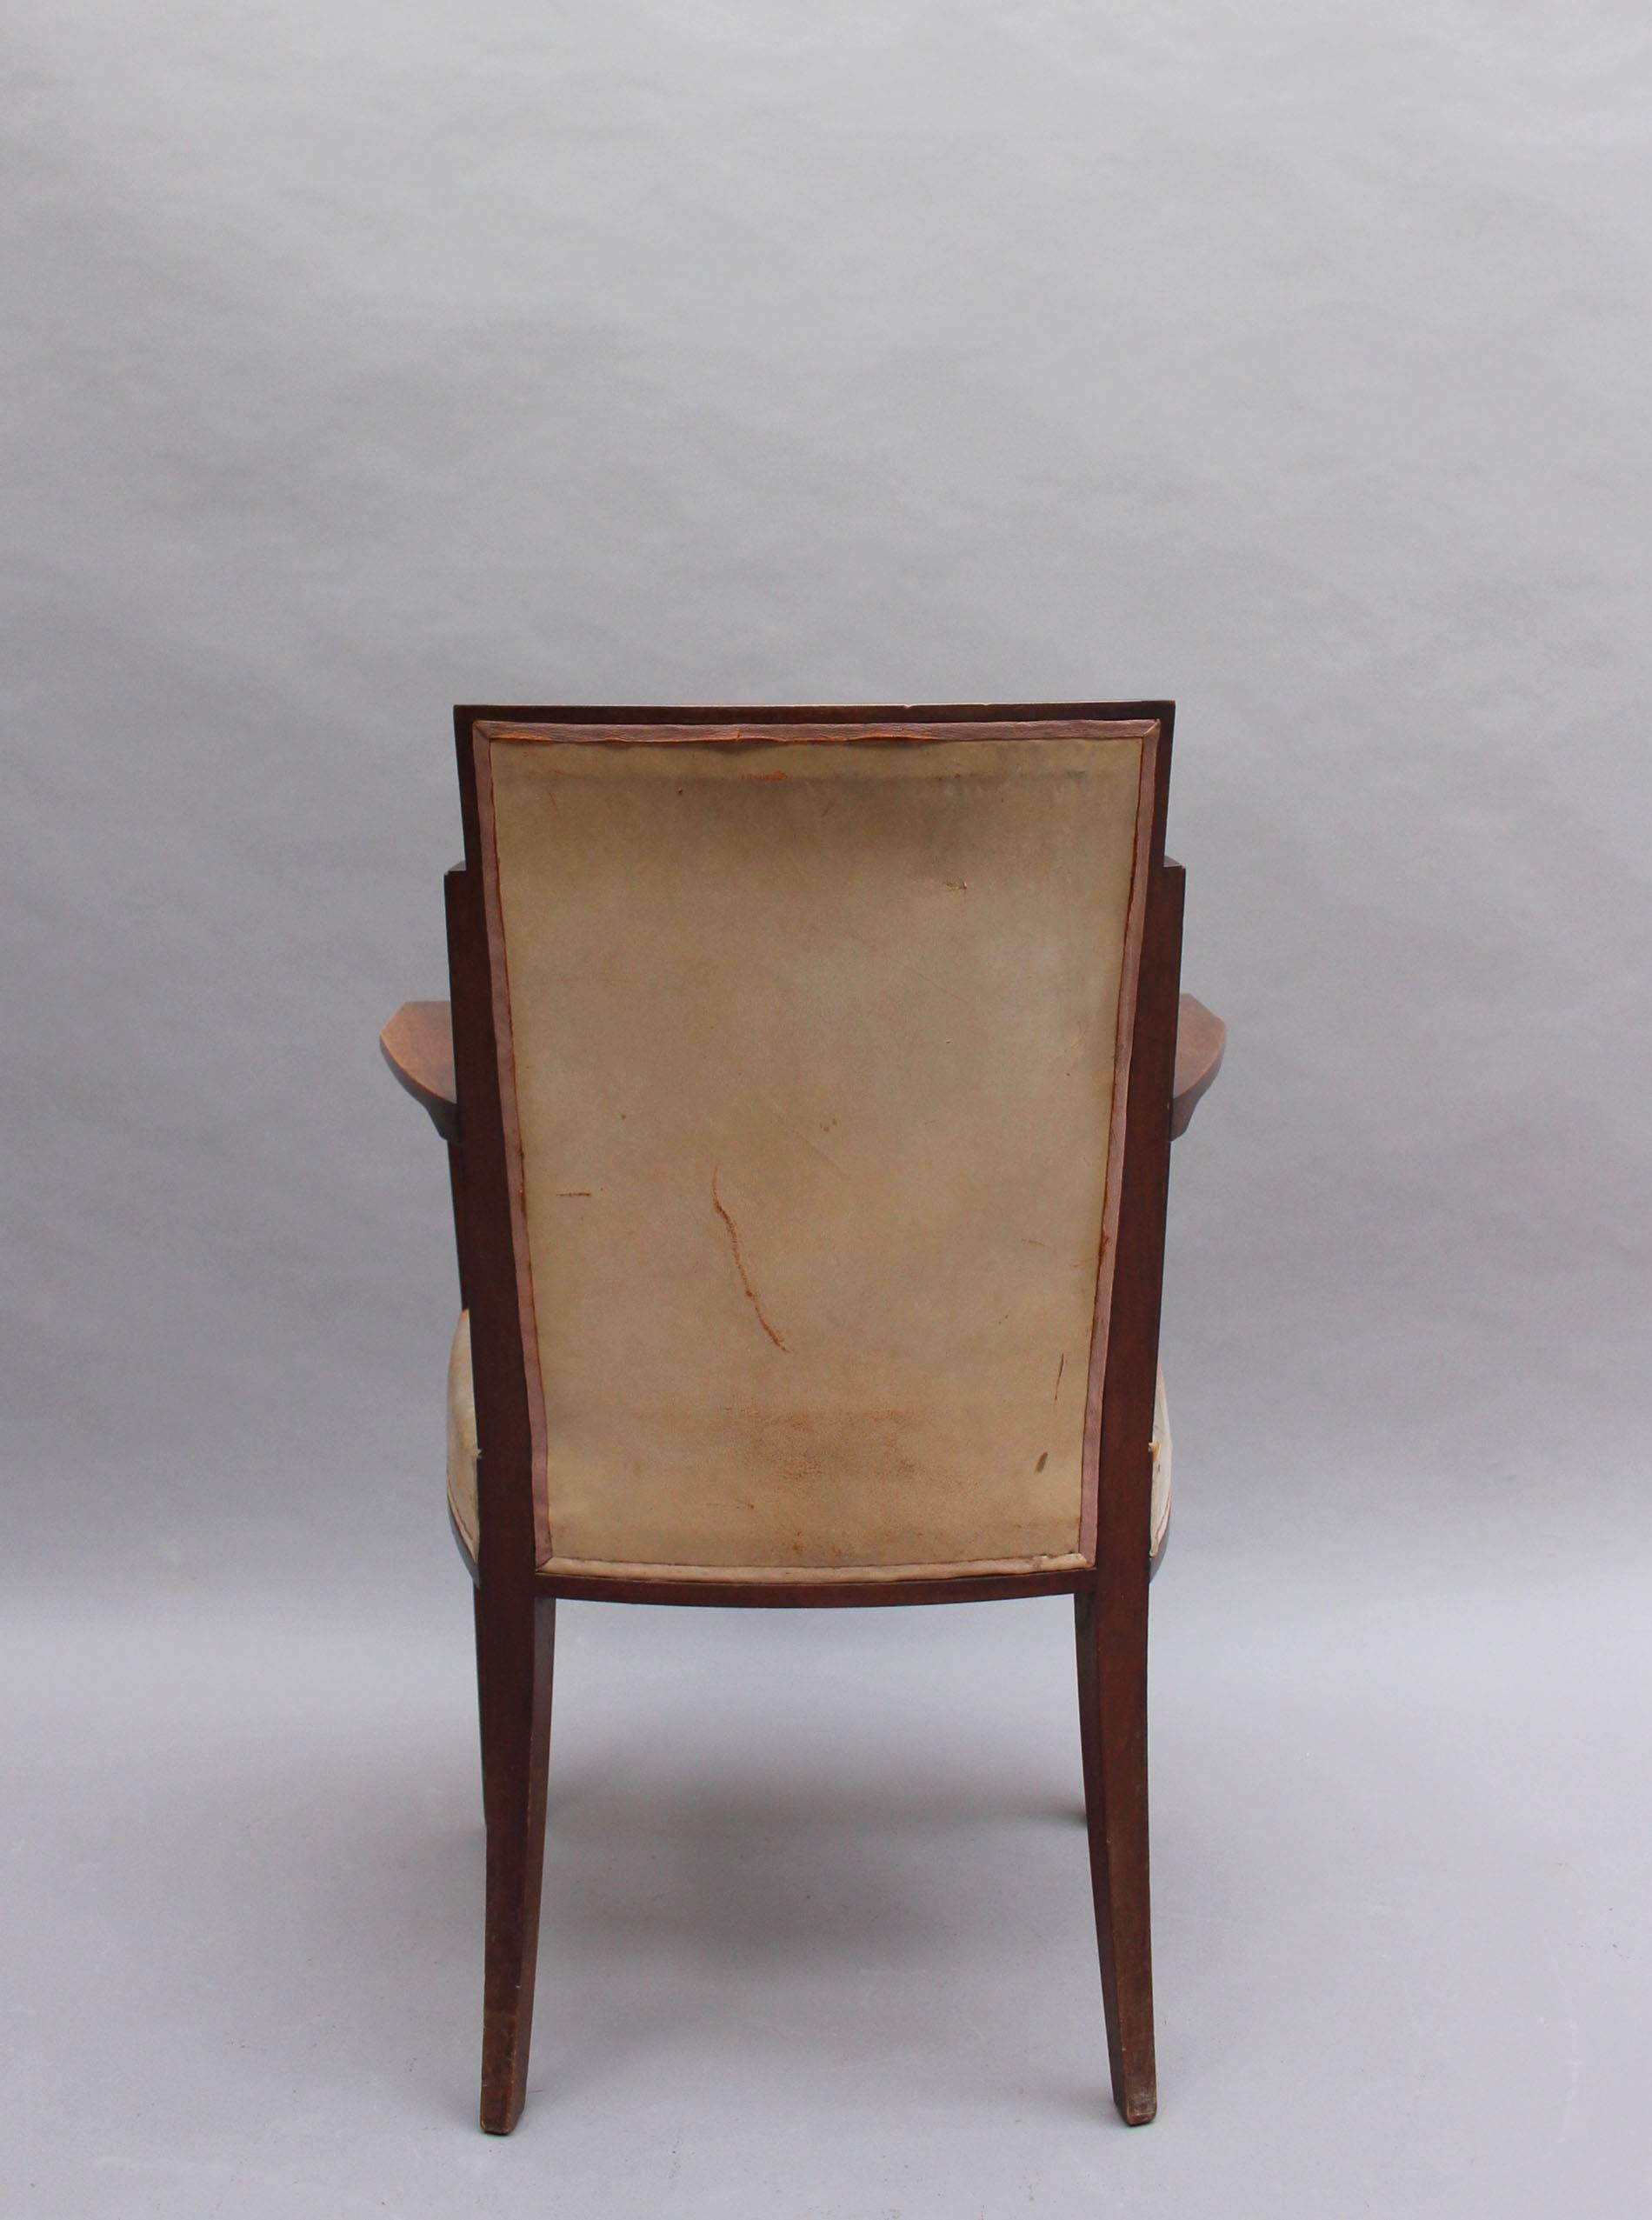 A Fine French Art Deco Mahogany Armchair by Dominique For Sale 1